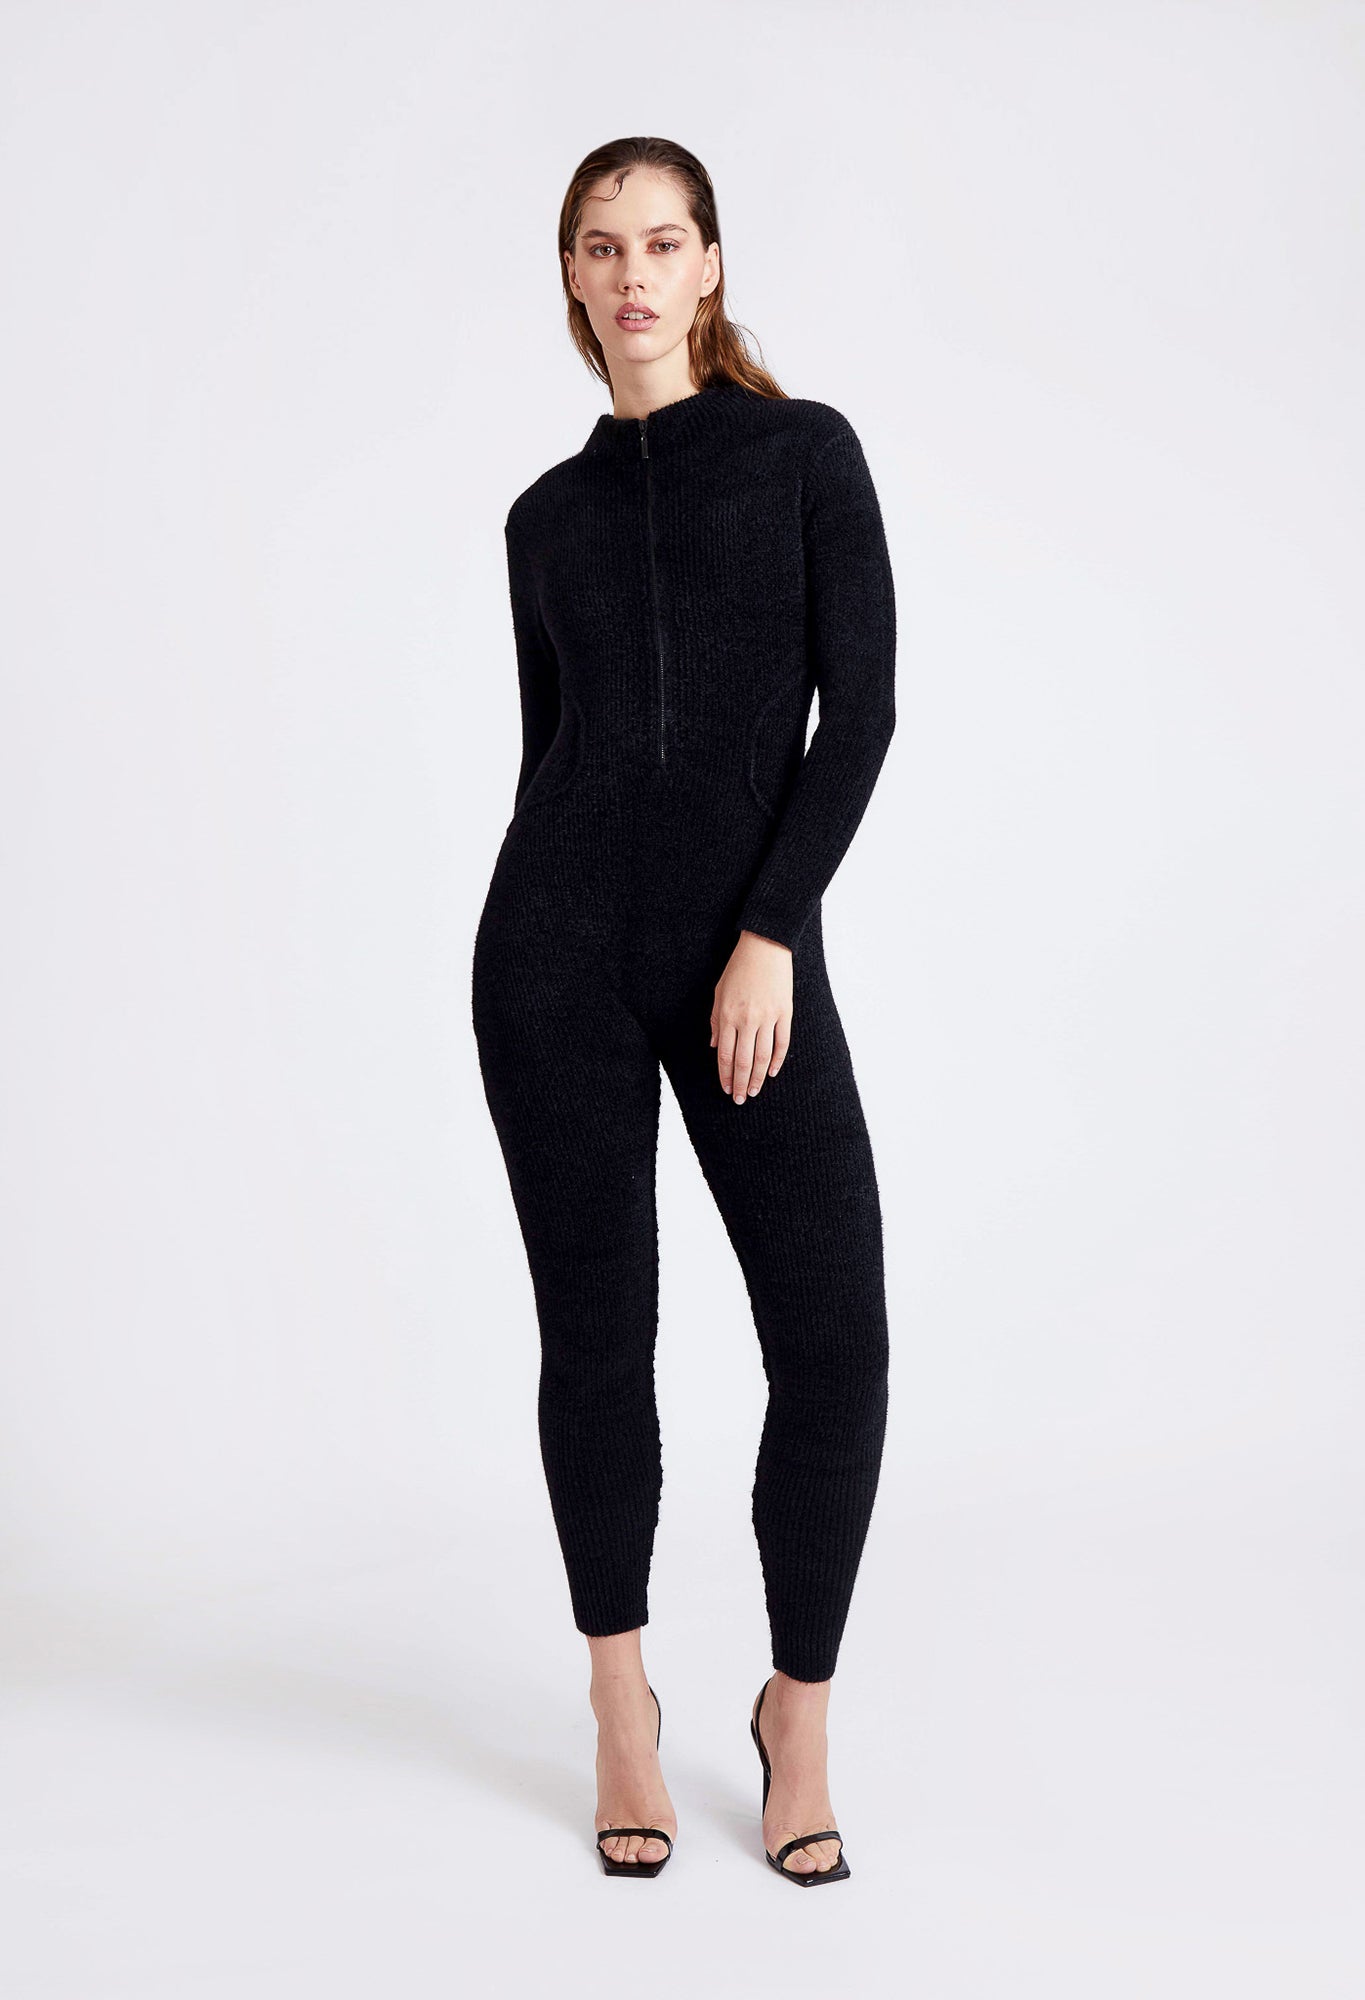 Wool Knit Catsuit - Panther